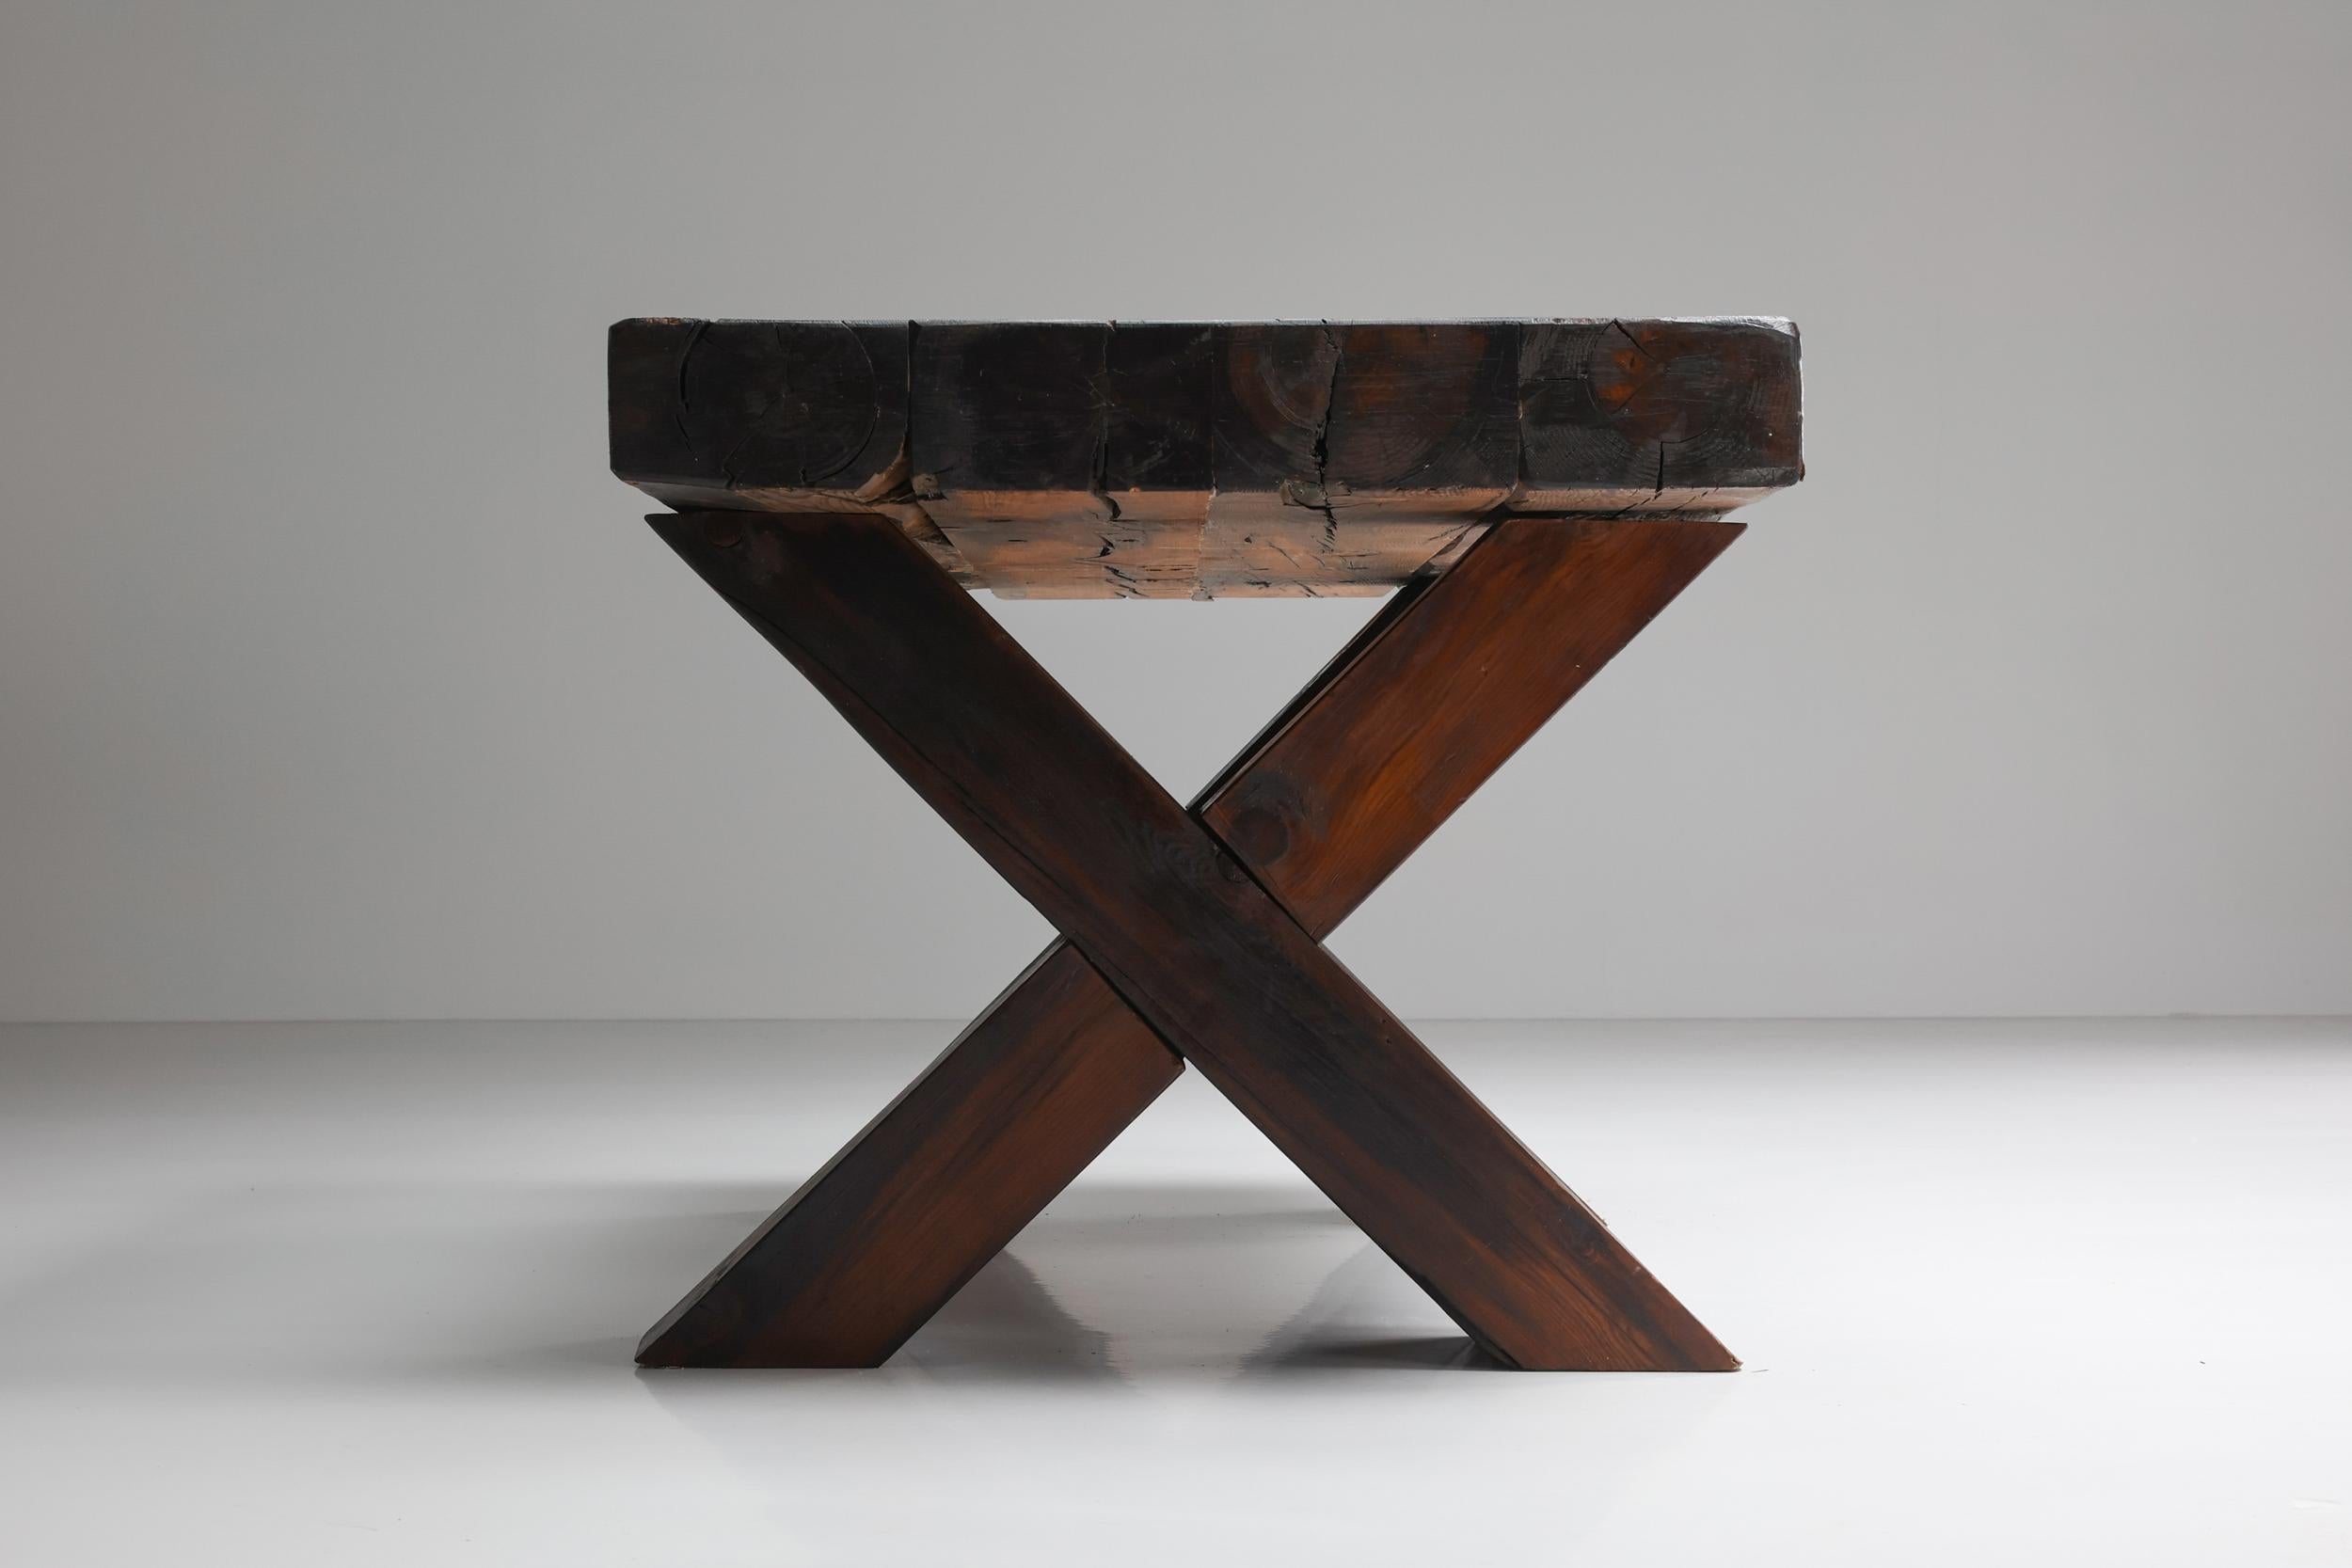 Rustic Brutalist Dark Wooden Dining Table with X-Legs, Italy, 1940's For Sale 2